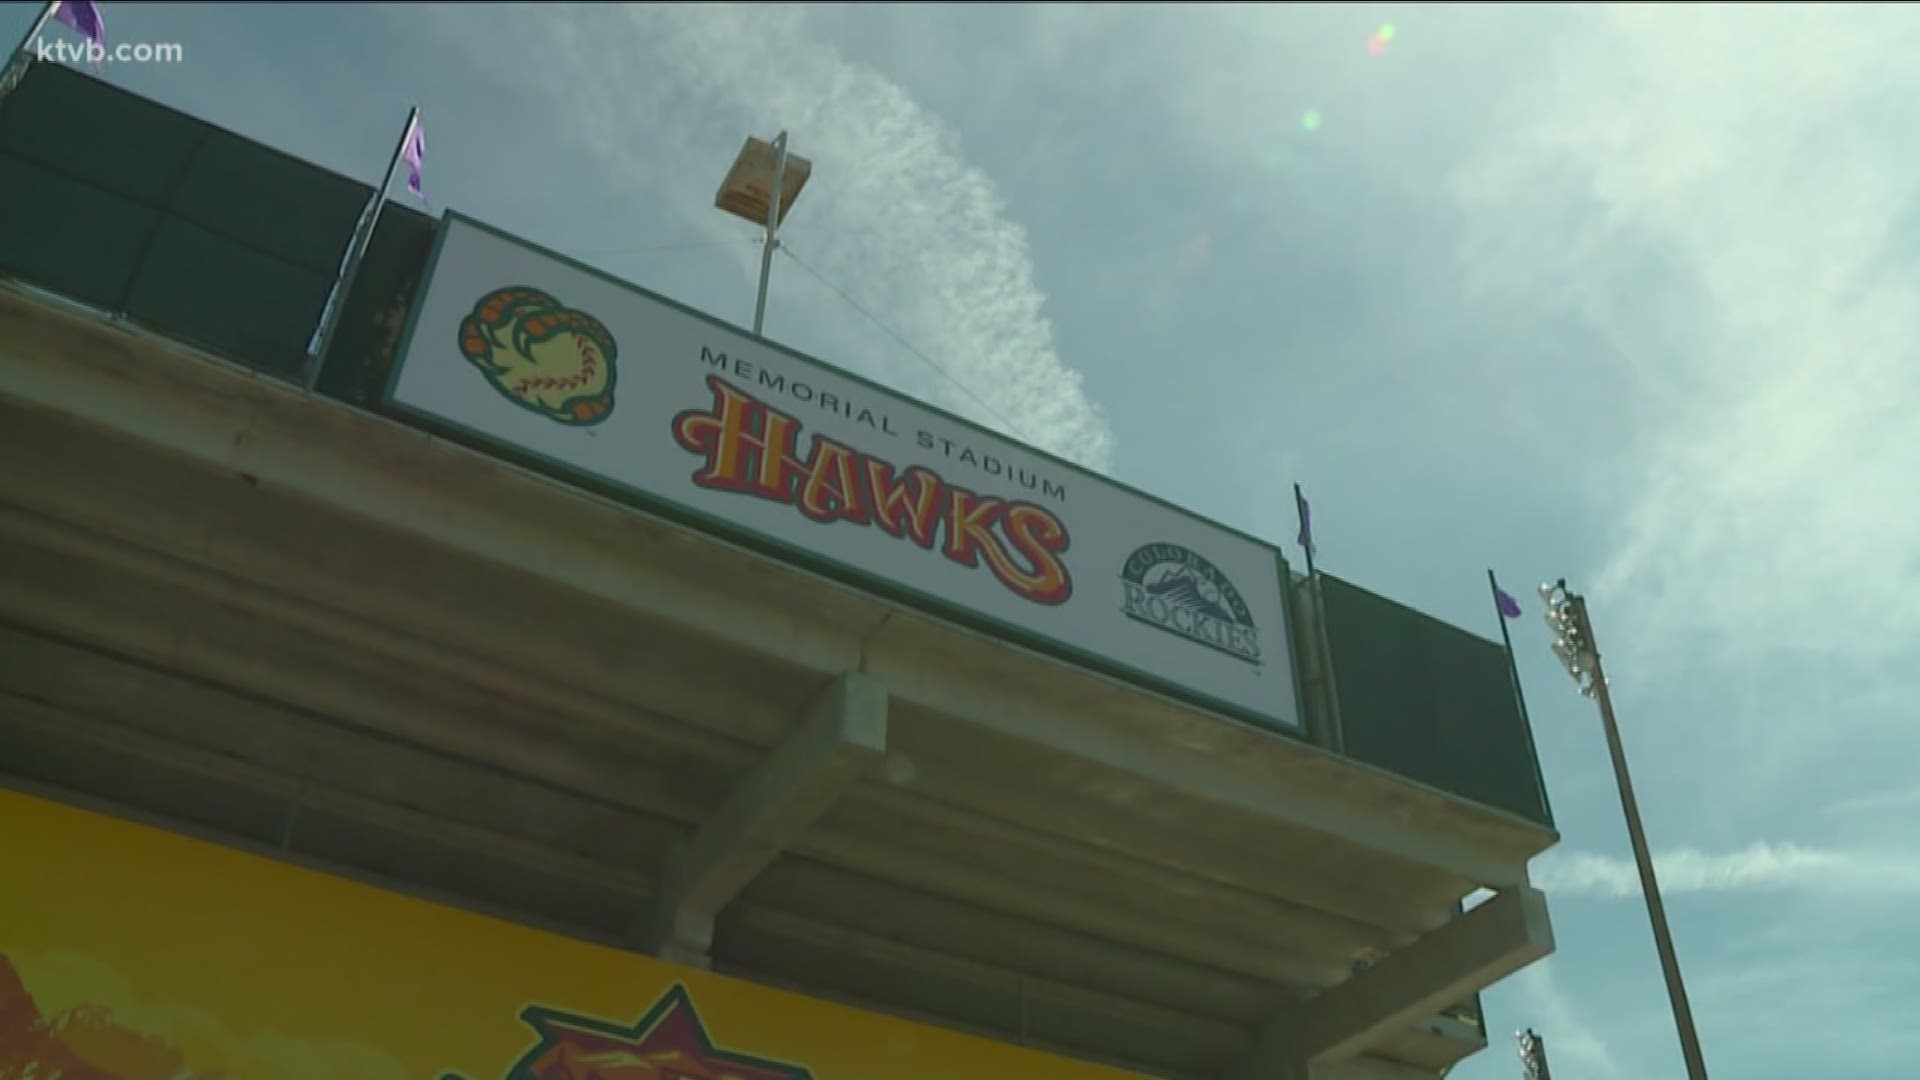 The Boise Hawks' home opener is on Monday, and the team is excited to show what they've been working on during the off season.